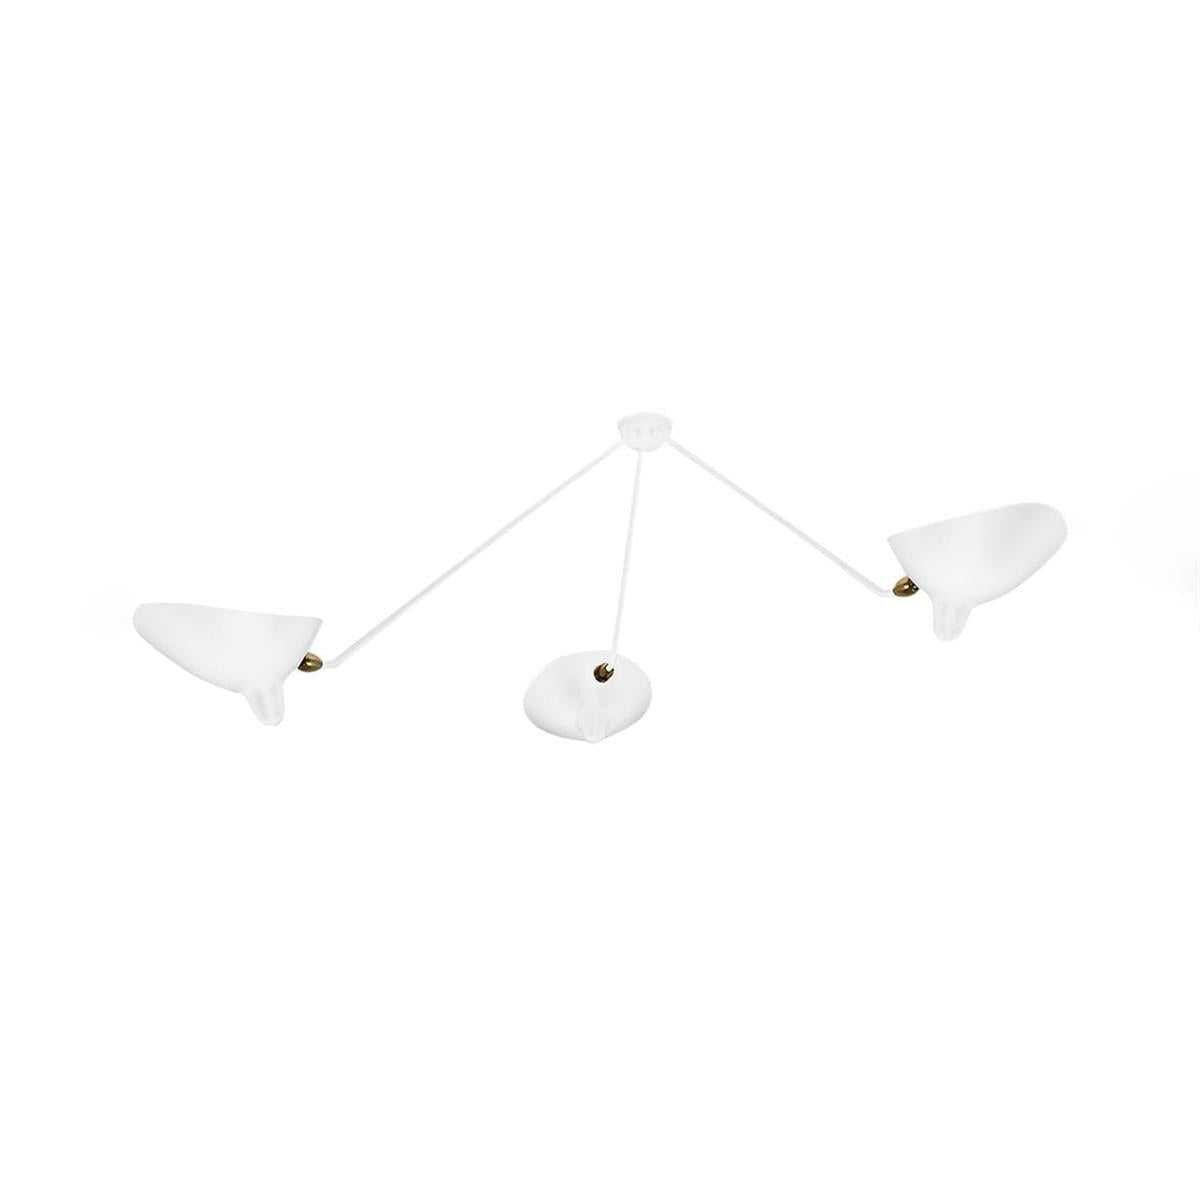 Leaning Serge Mouille Ceiling Lamp B